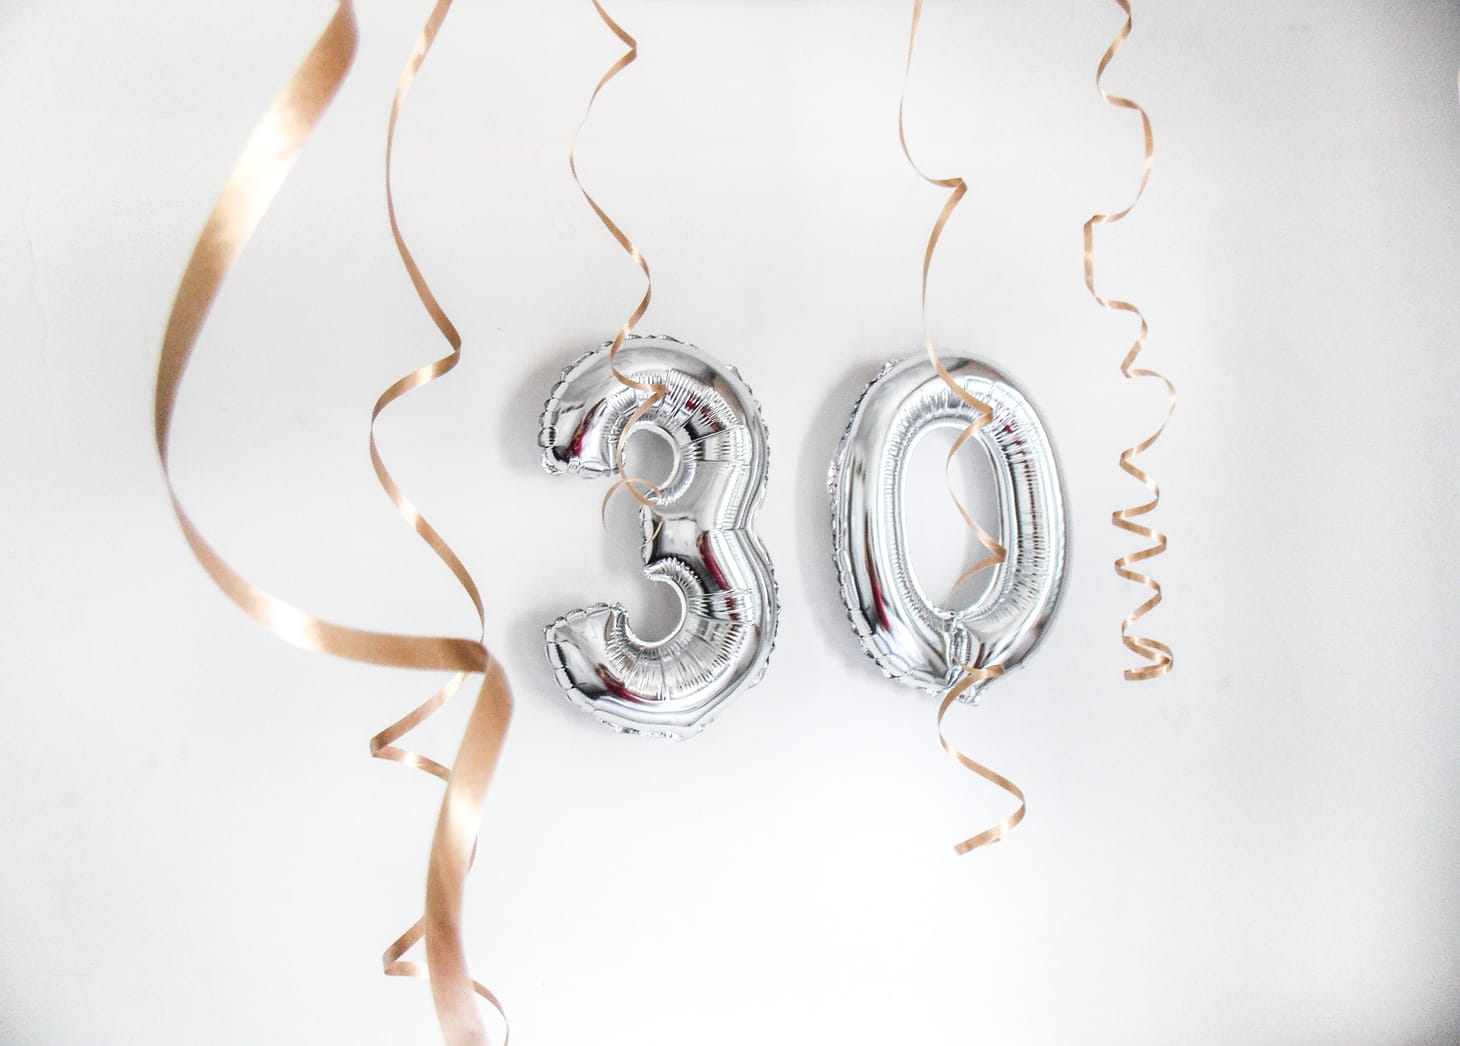 Special Edition: 66 things I know at 30 I wish I would’ve known earlier